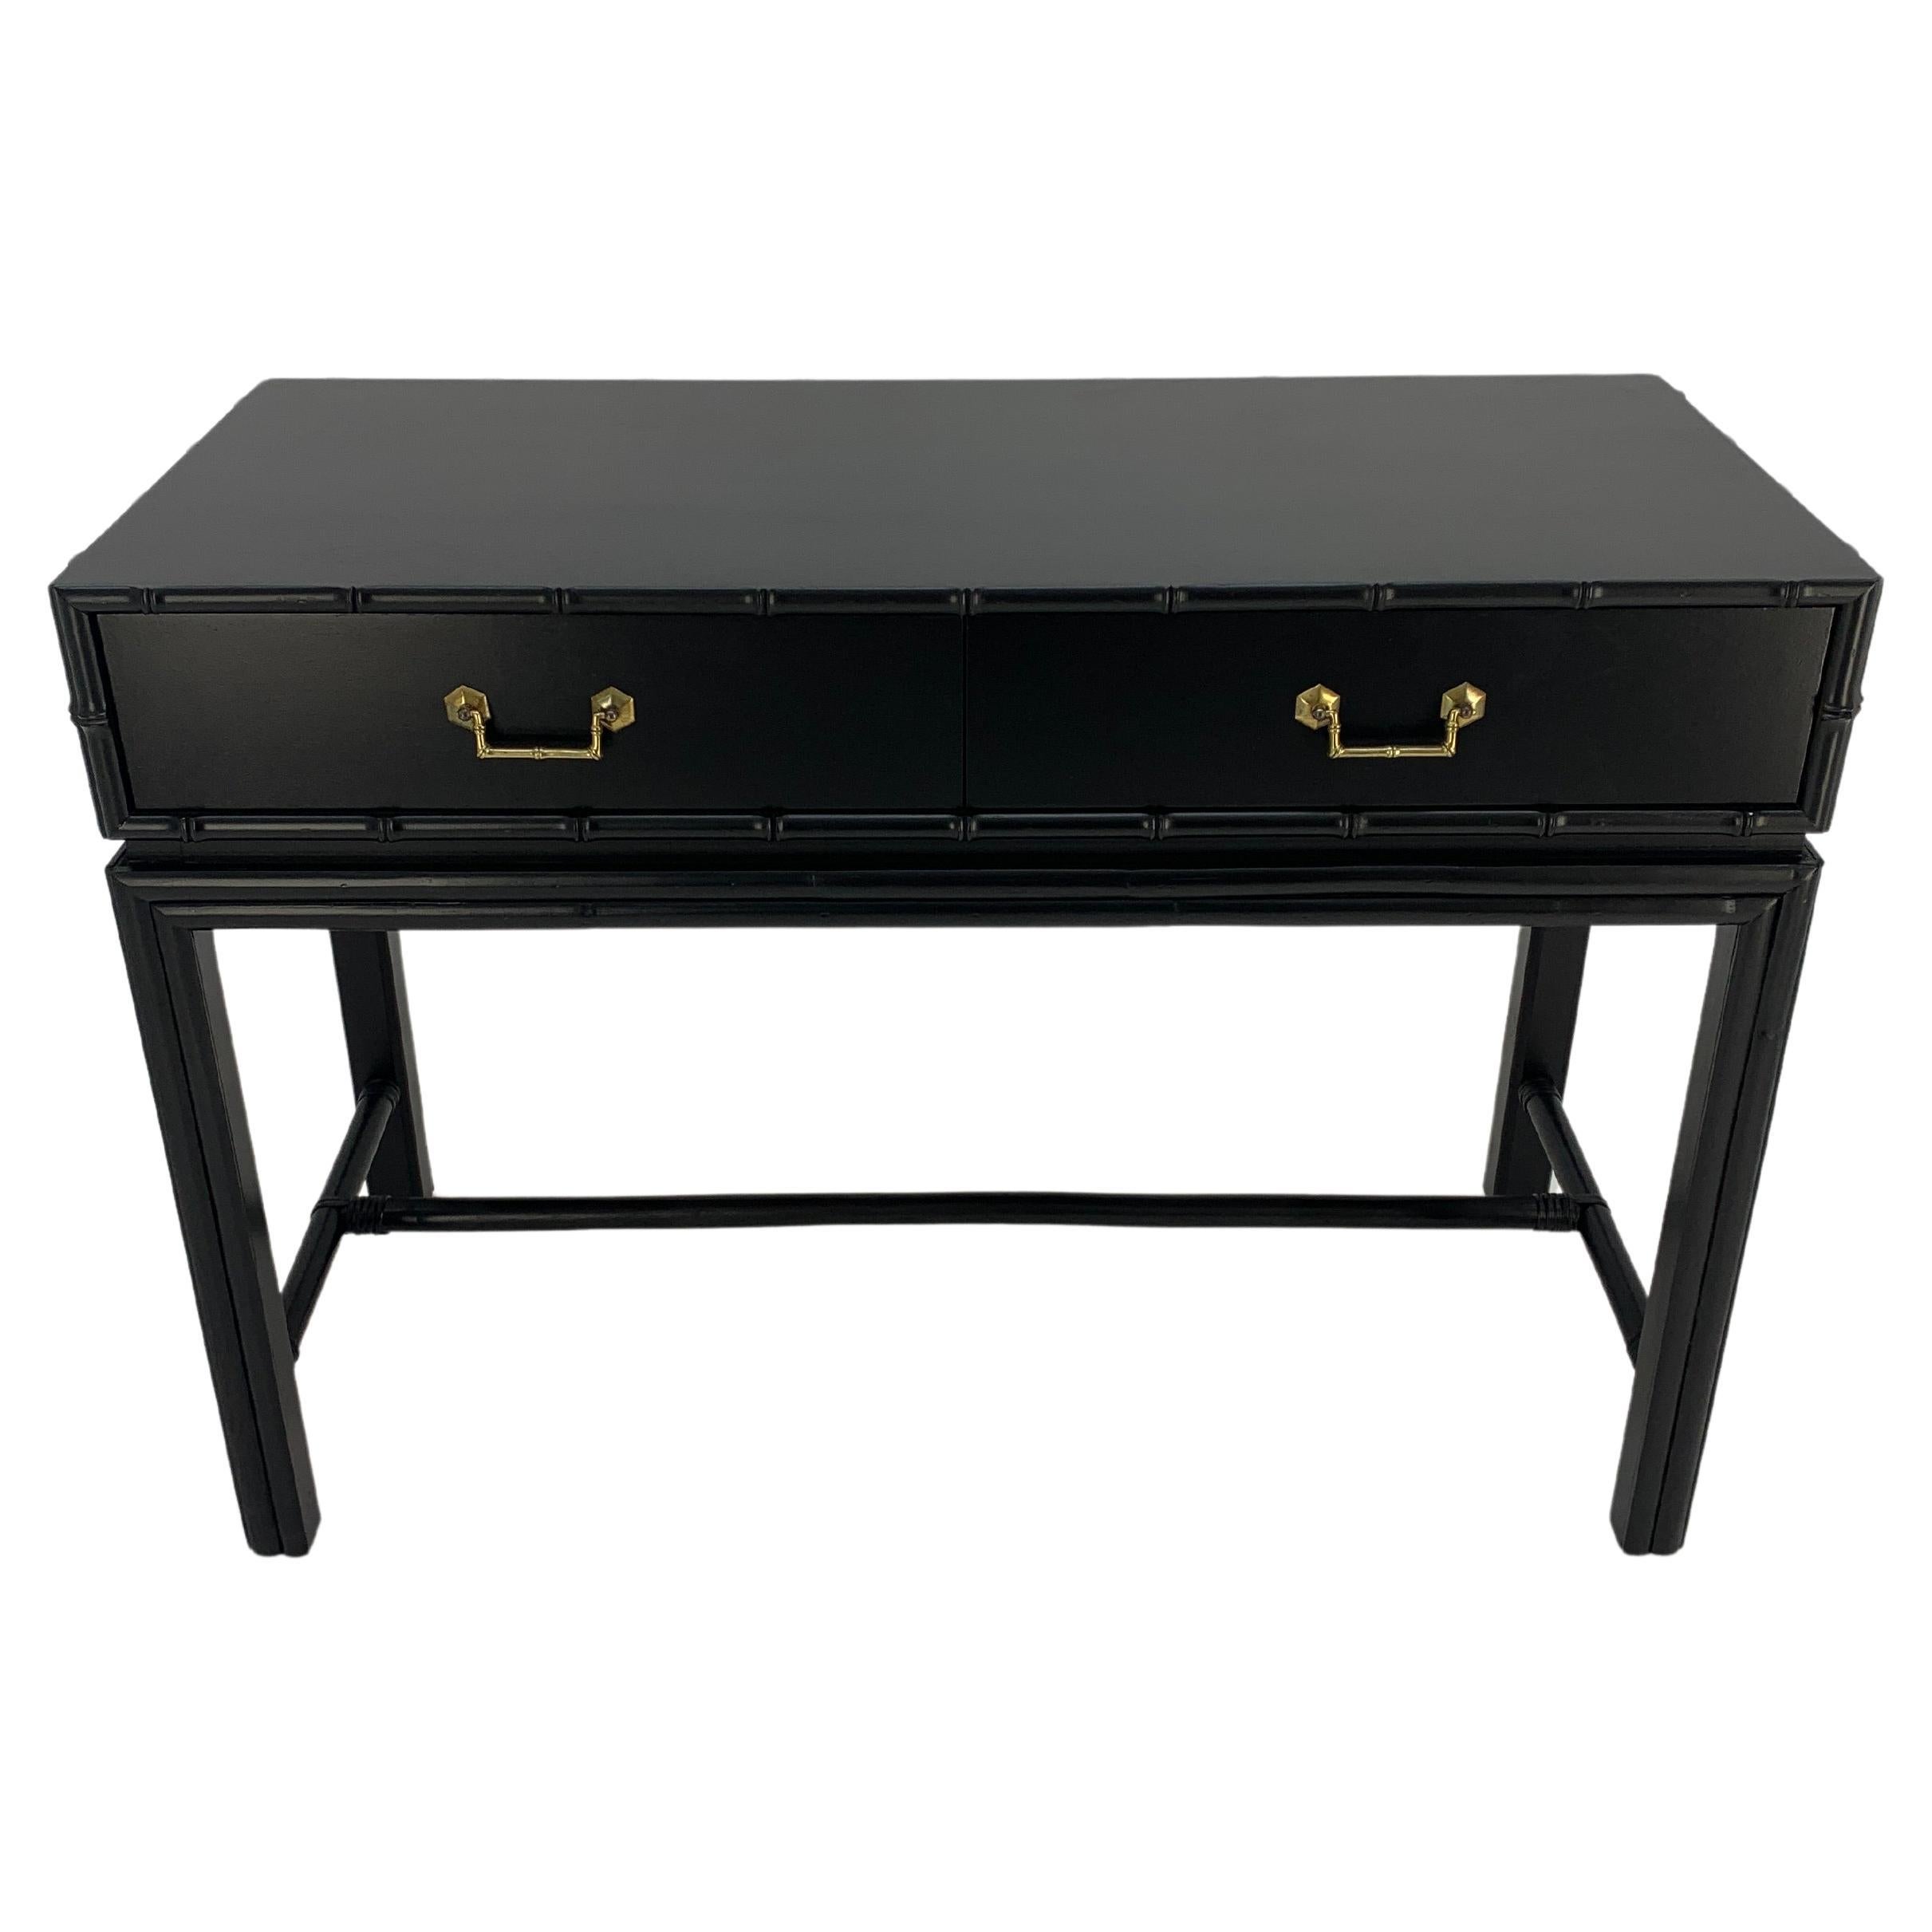 Ficks Reed Black Lacquer Faux Bamboo Solid Brass Pulls Two Drawer Console Hall Table Small Desk MINT!
Inspected mint vintage condition.